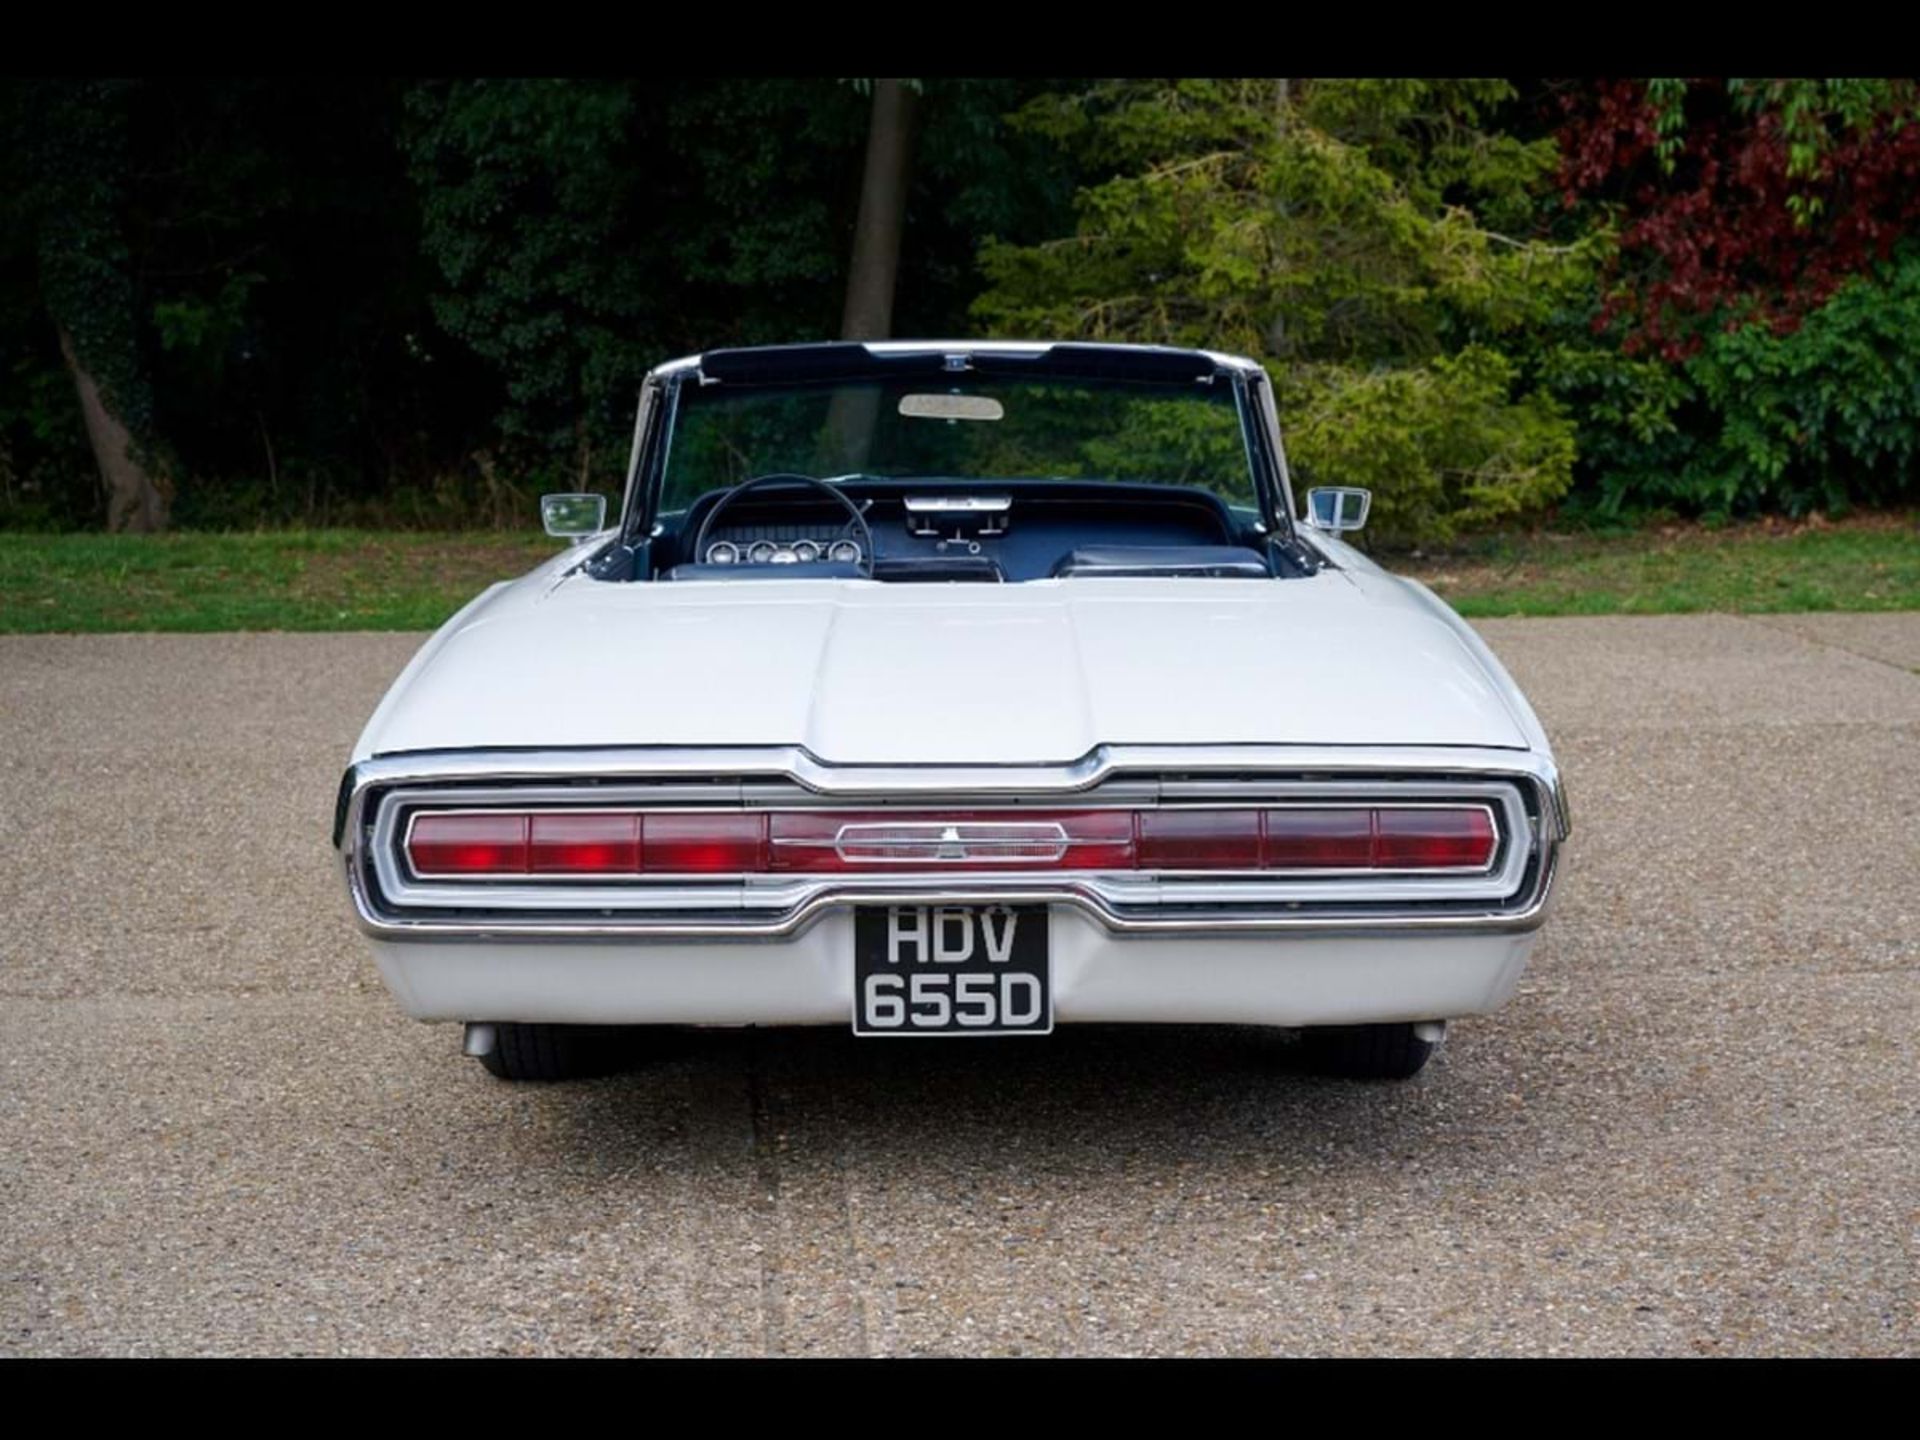 1966 Ford Thunderbird Convertible - Image 9 of 24